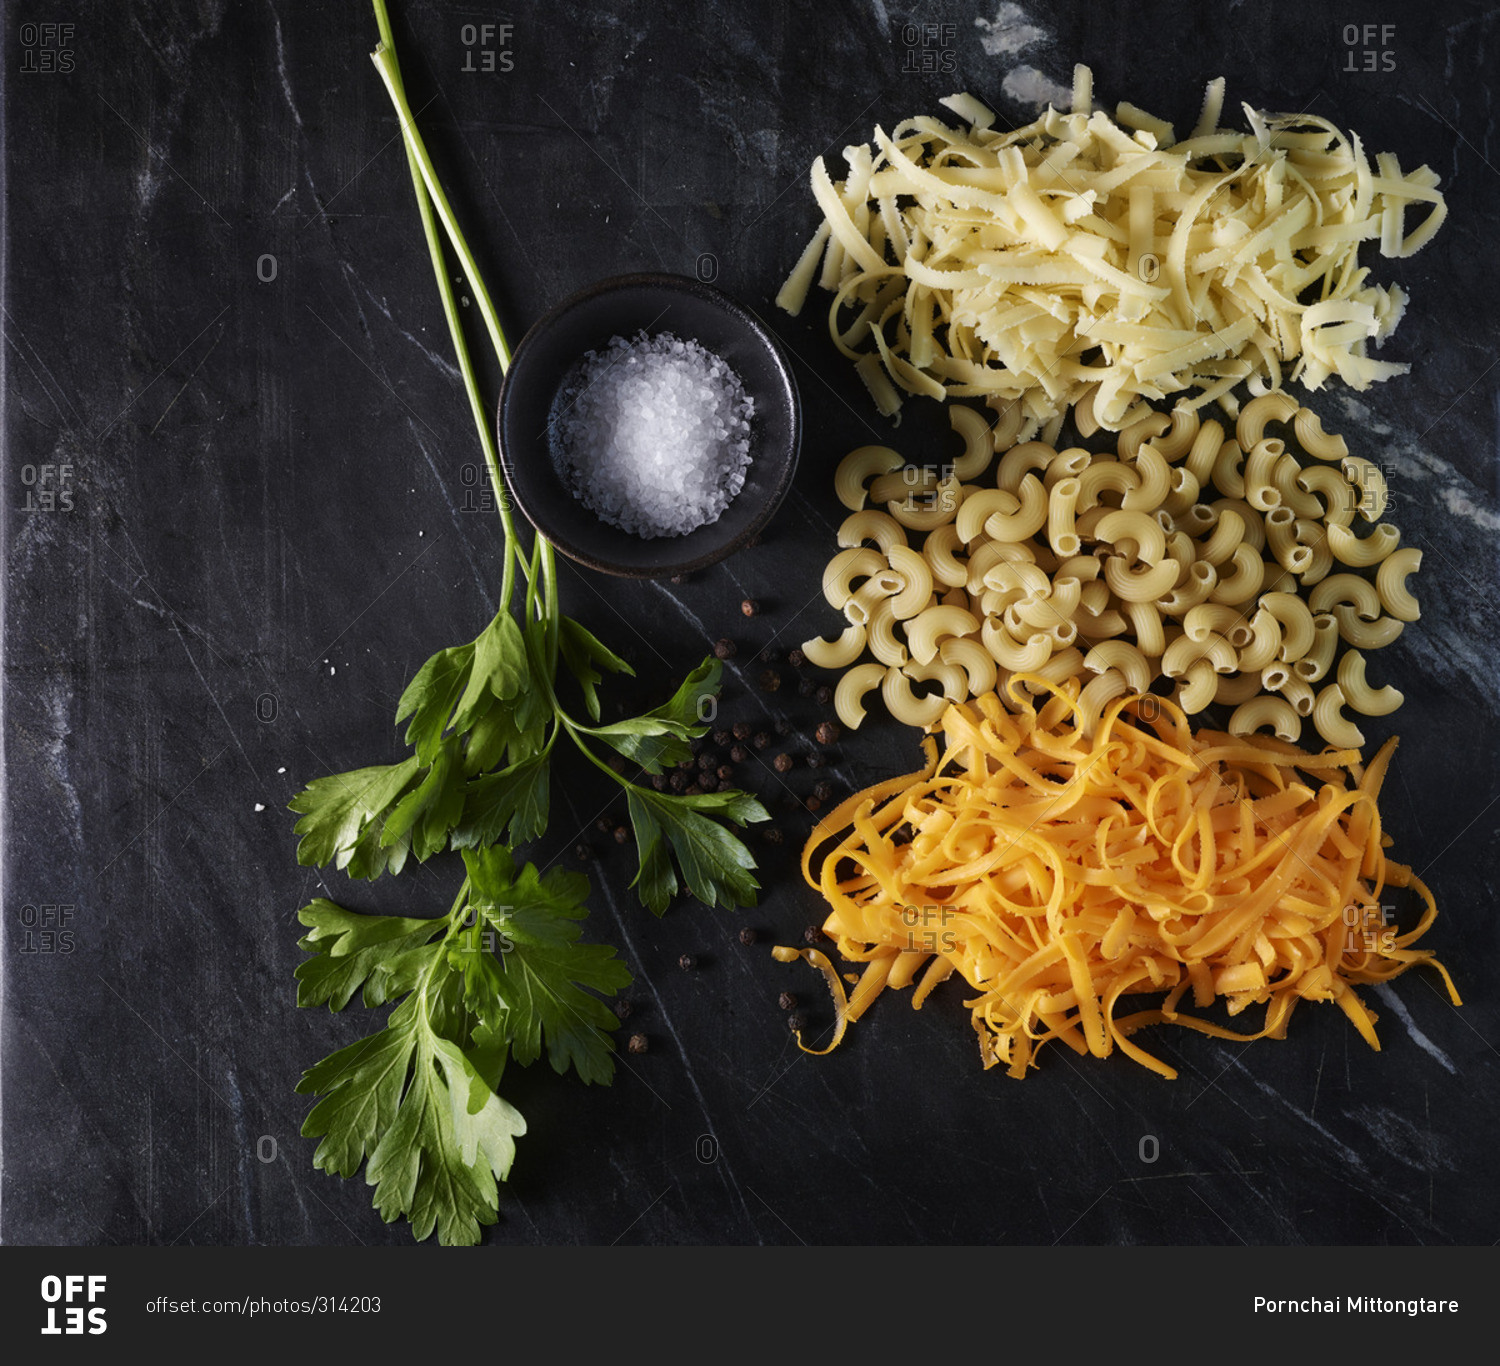 Raw ingredients for macaroni and cheese